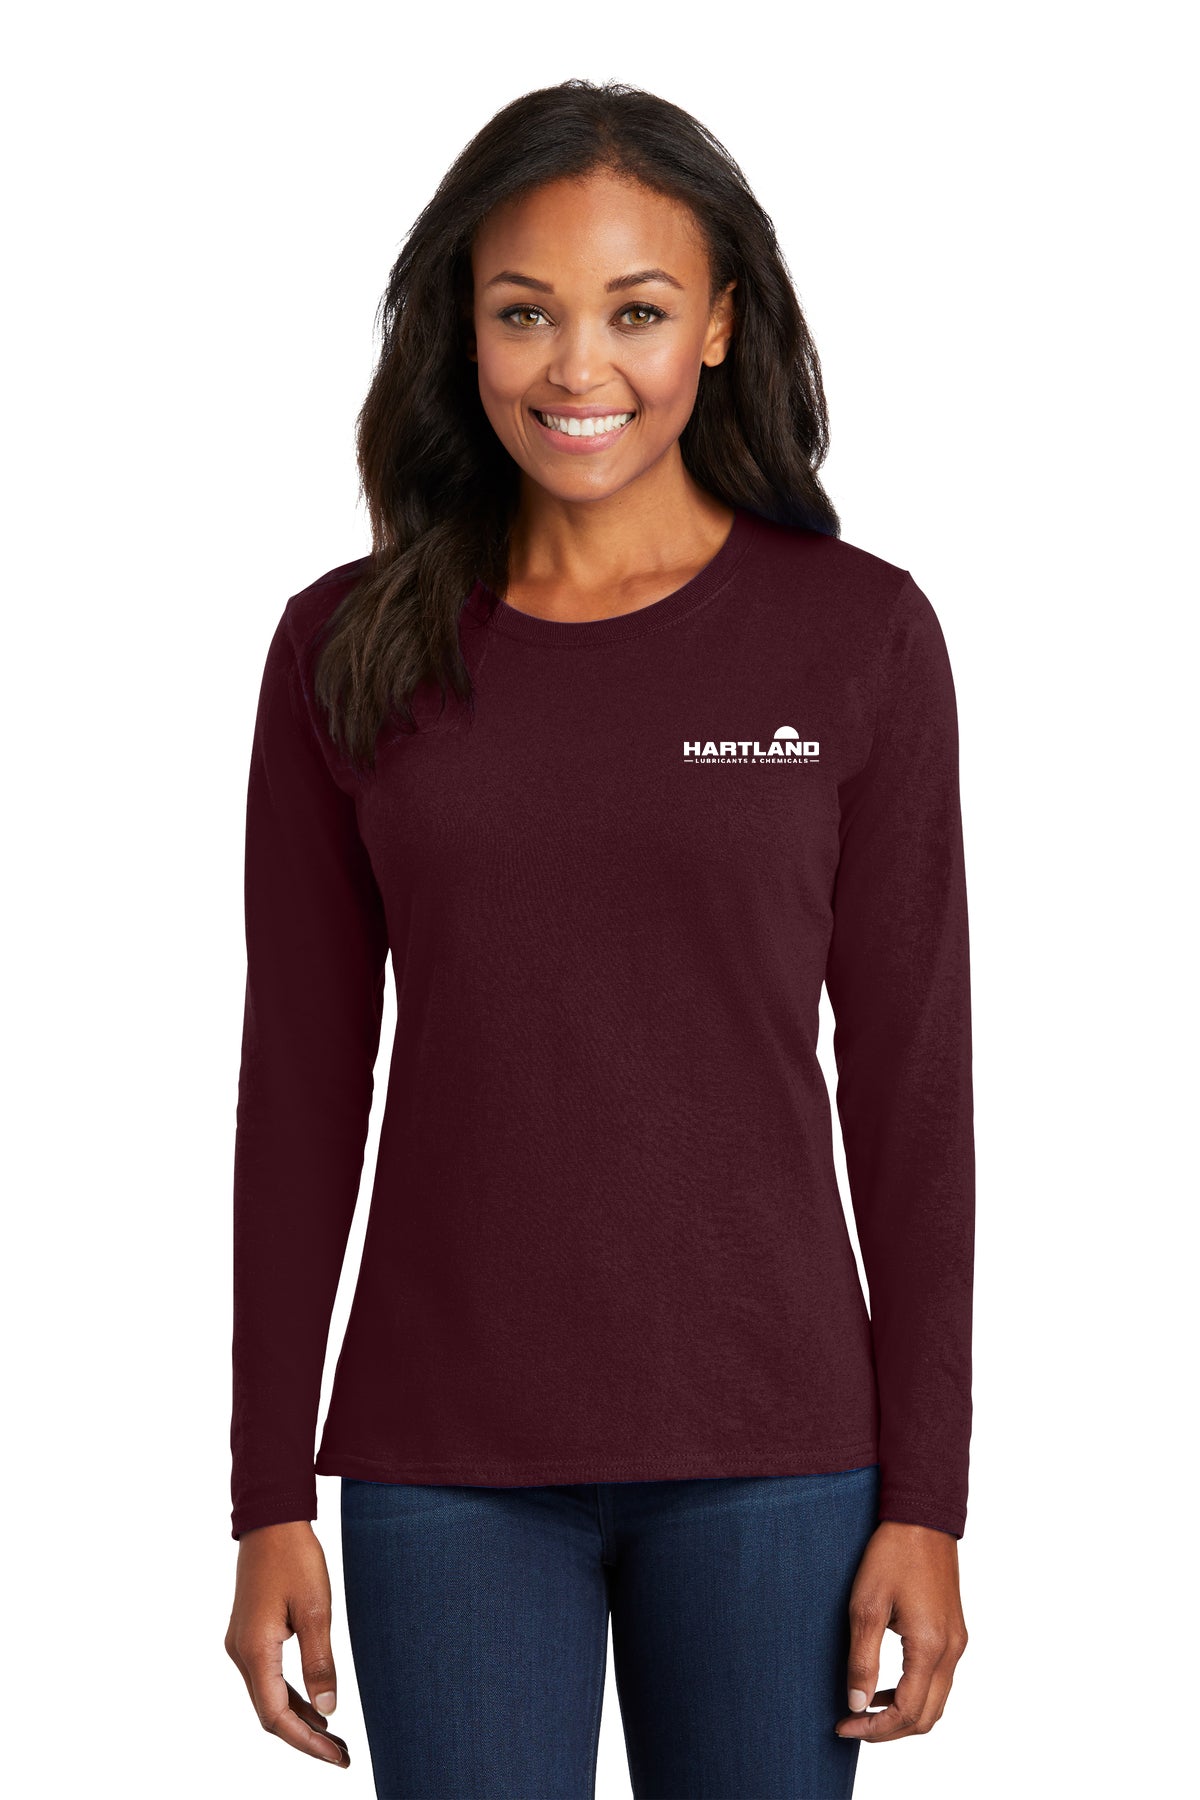 Hartland Lubricants and Chemicals Ladies Long Sleeve – Multiple Colors